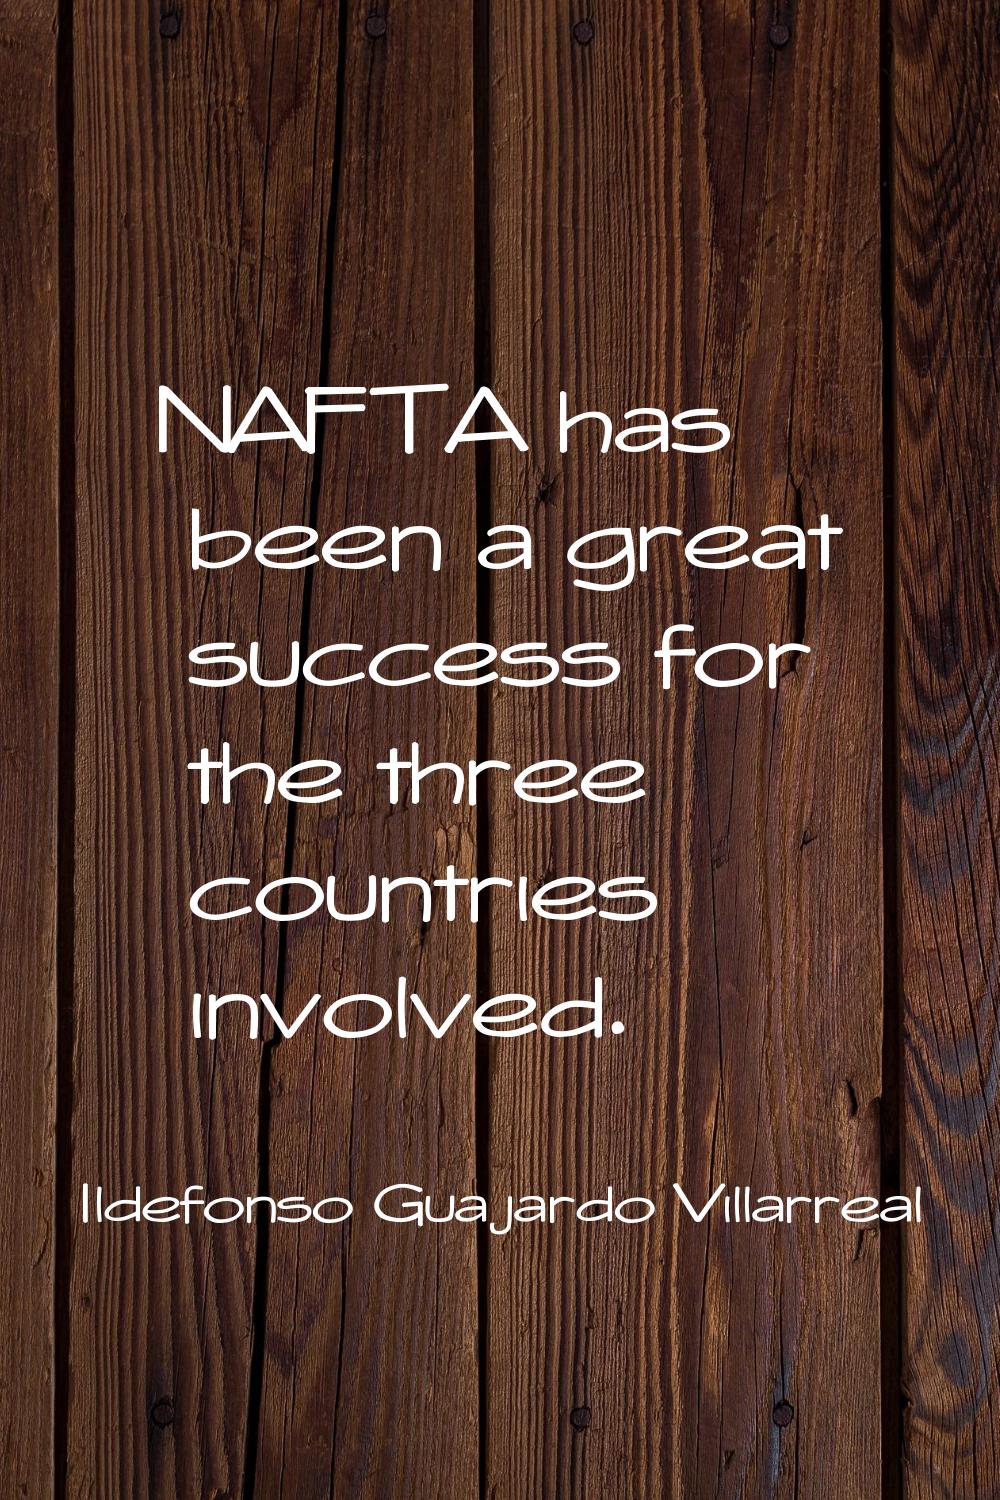 NAFTA has been a great success for the three countries involved.